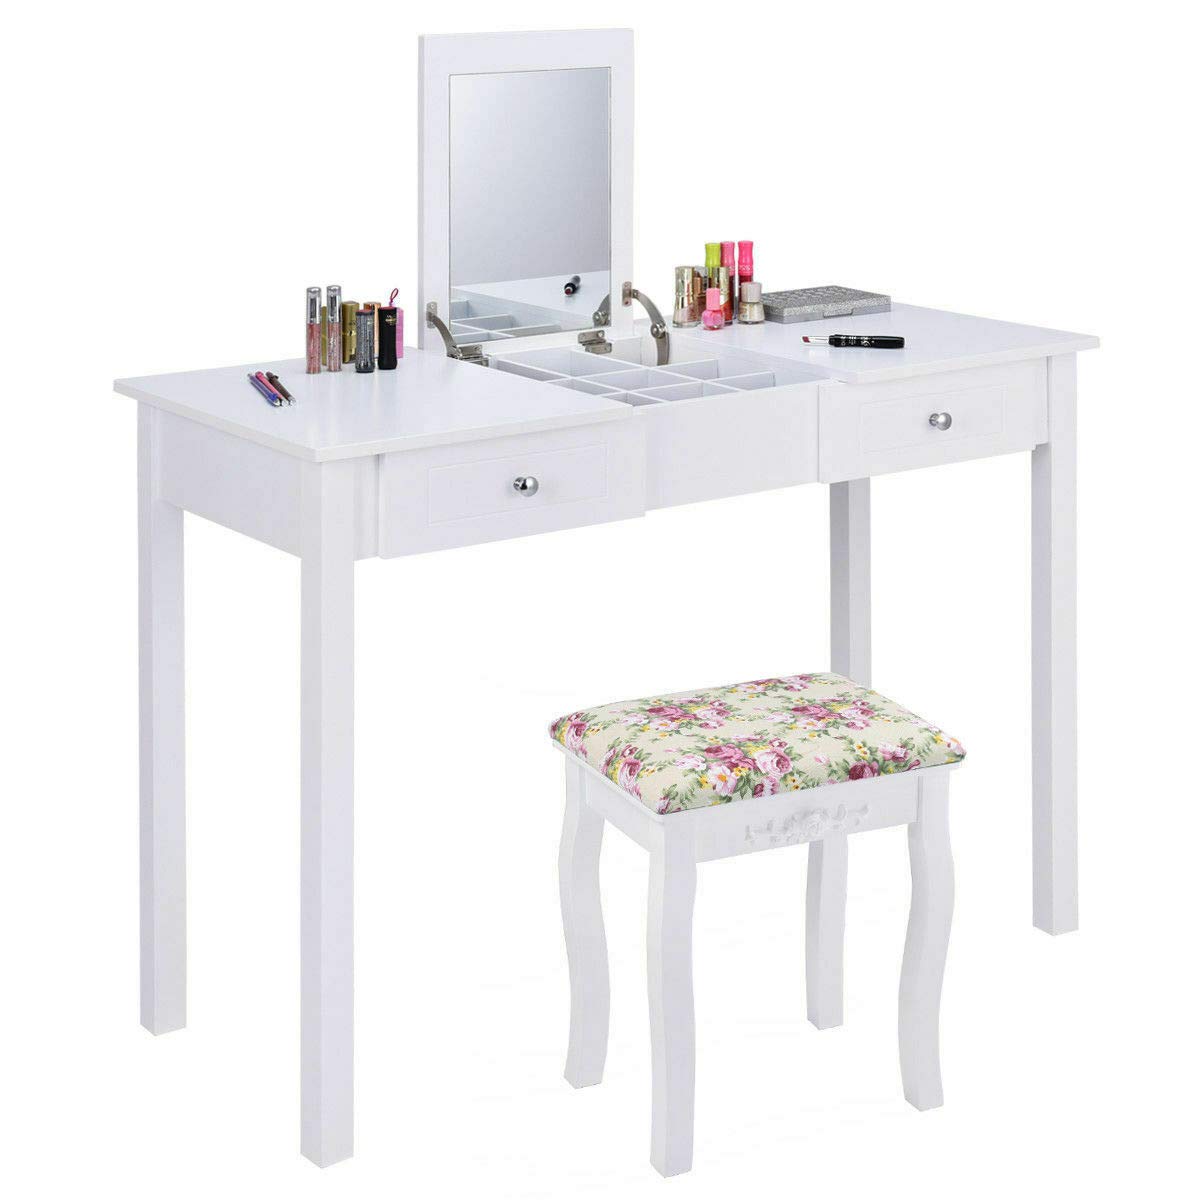 Giantex Vanity Set Makeup Table with Mirror, Cushioned Stool Bench Chair Large Desk Flip Top Home Bedroom